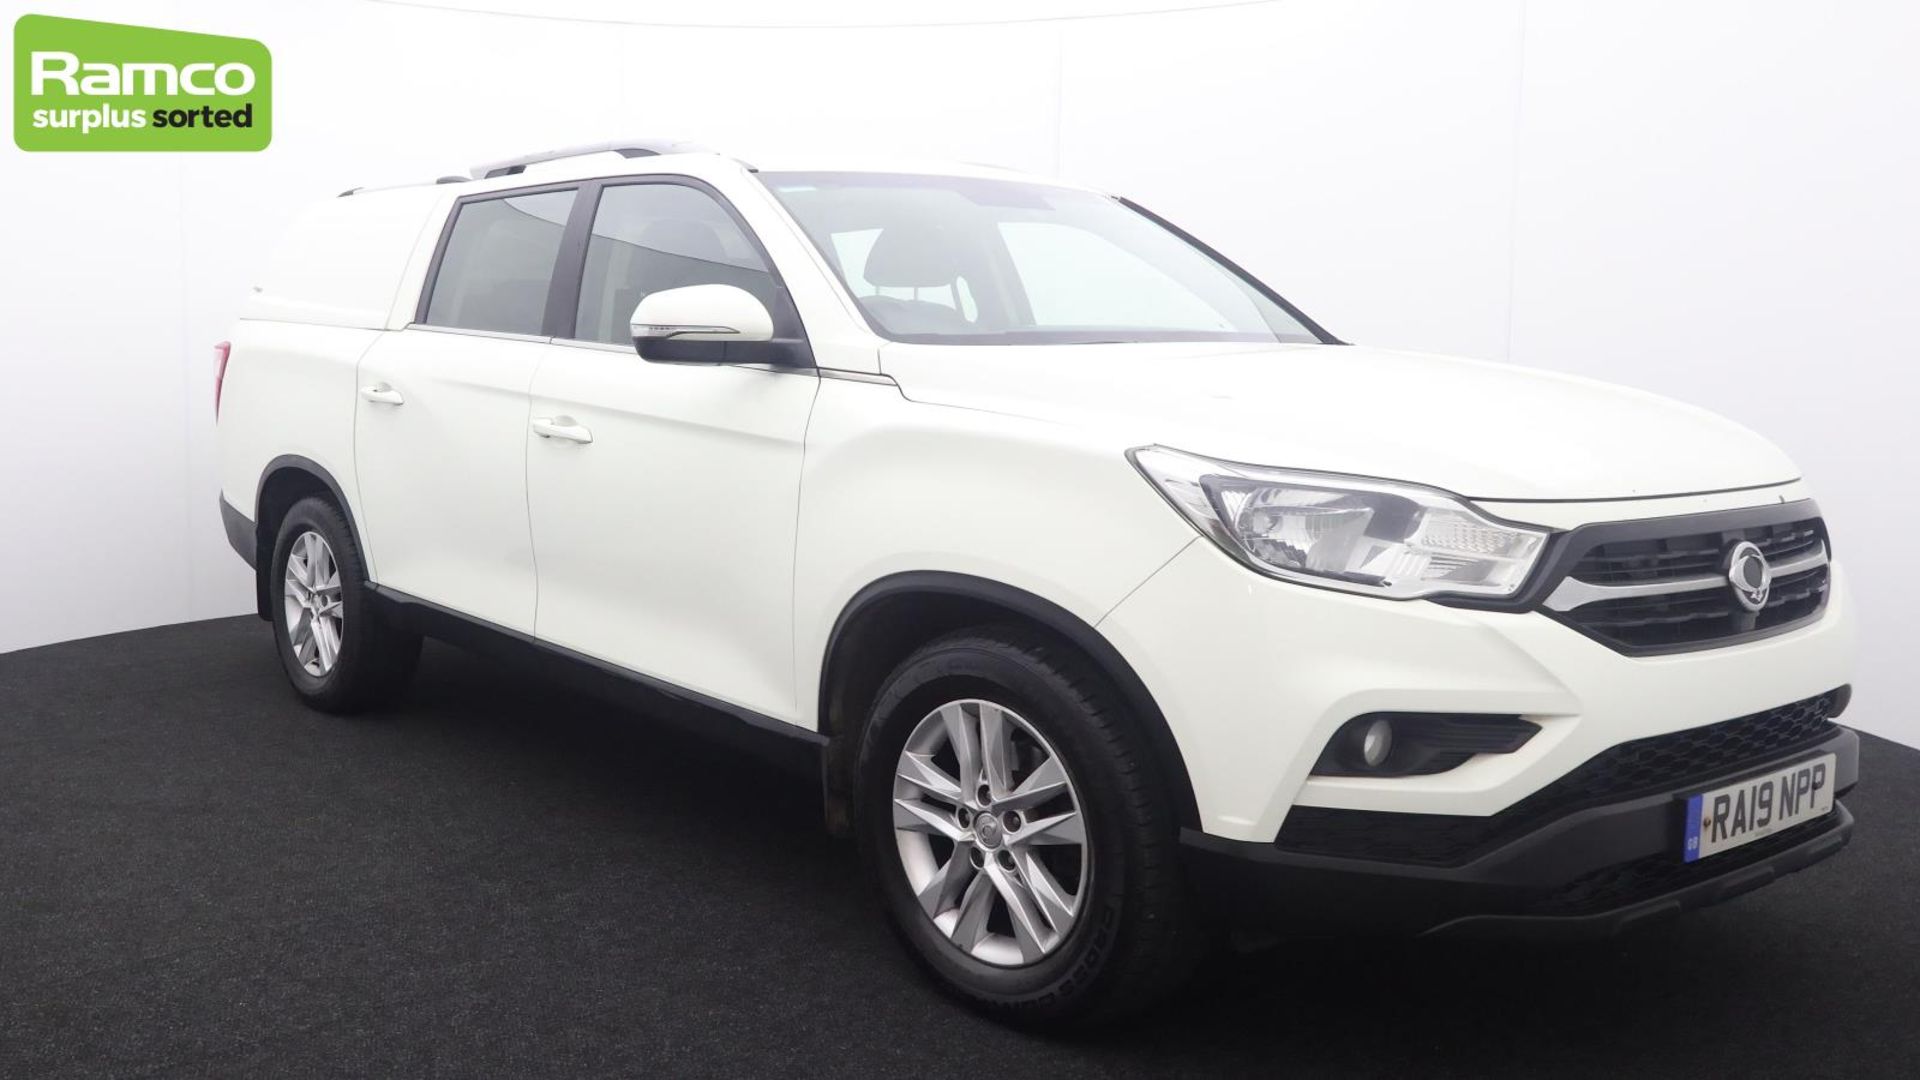 SsangYong Musso Rebel Auto RA19 NPP 2.2L Pick Up Euro 6 - Image 8 of 45